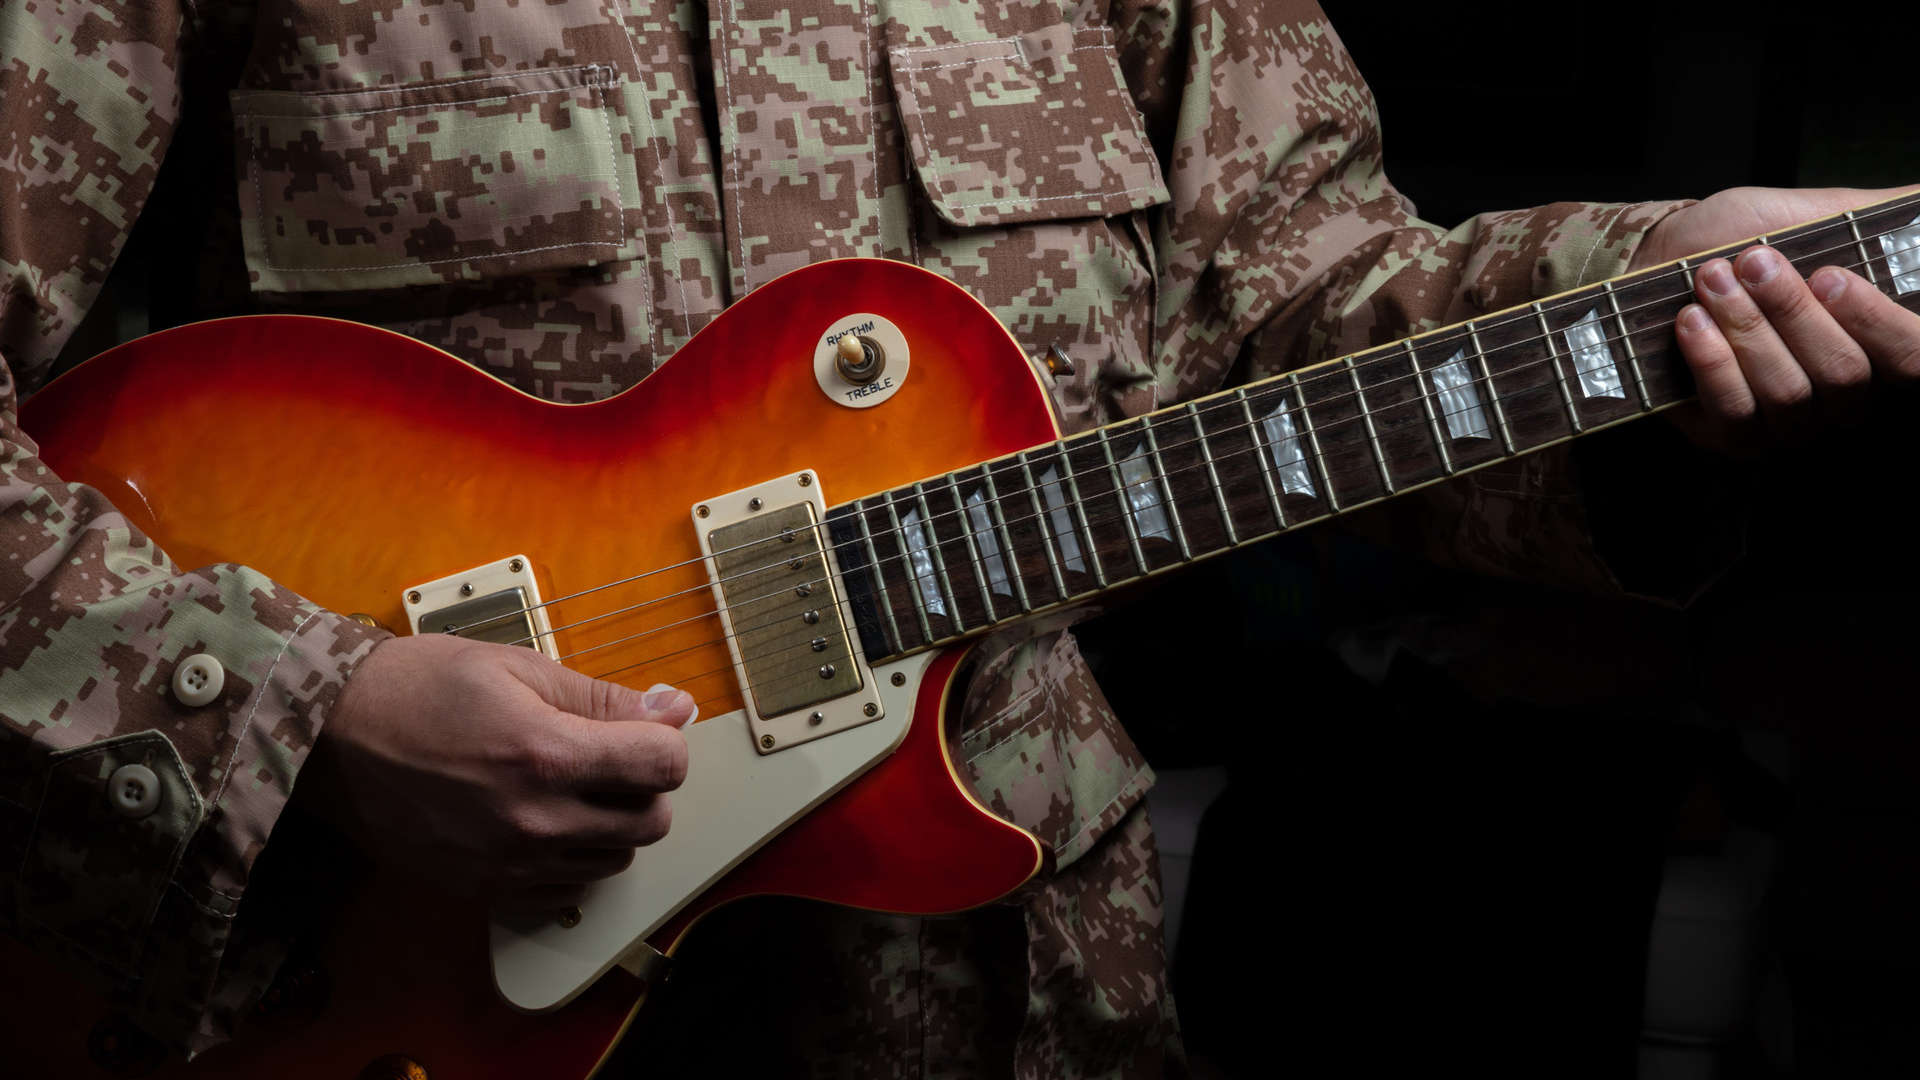 Soldier in uniform playing guitar